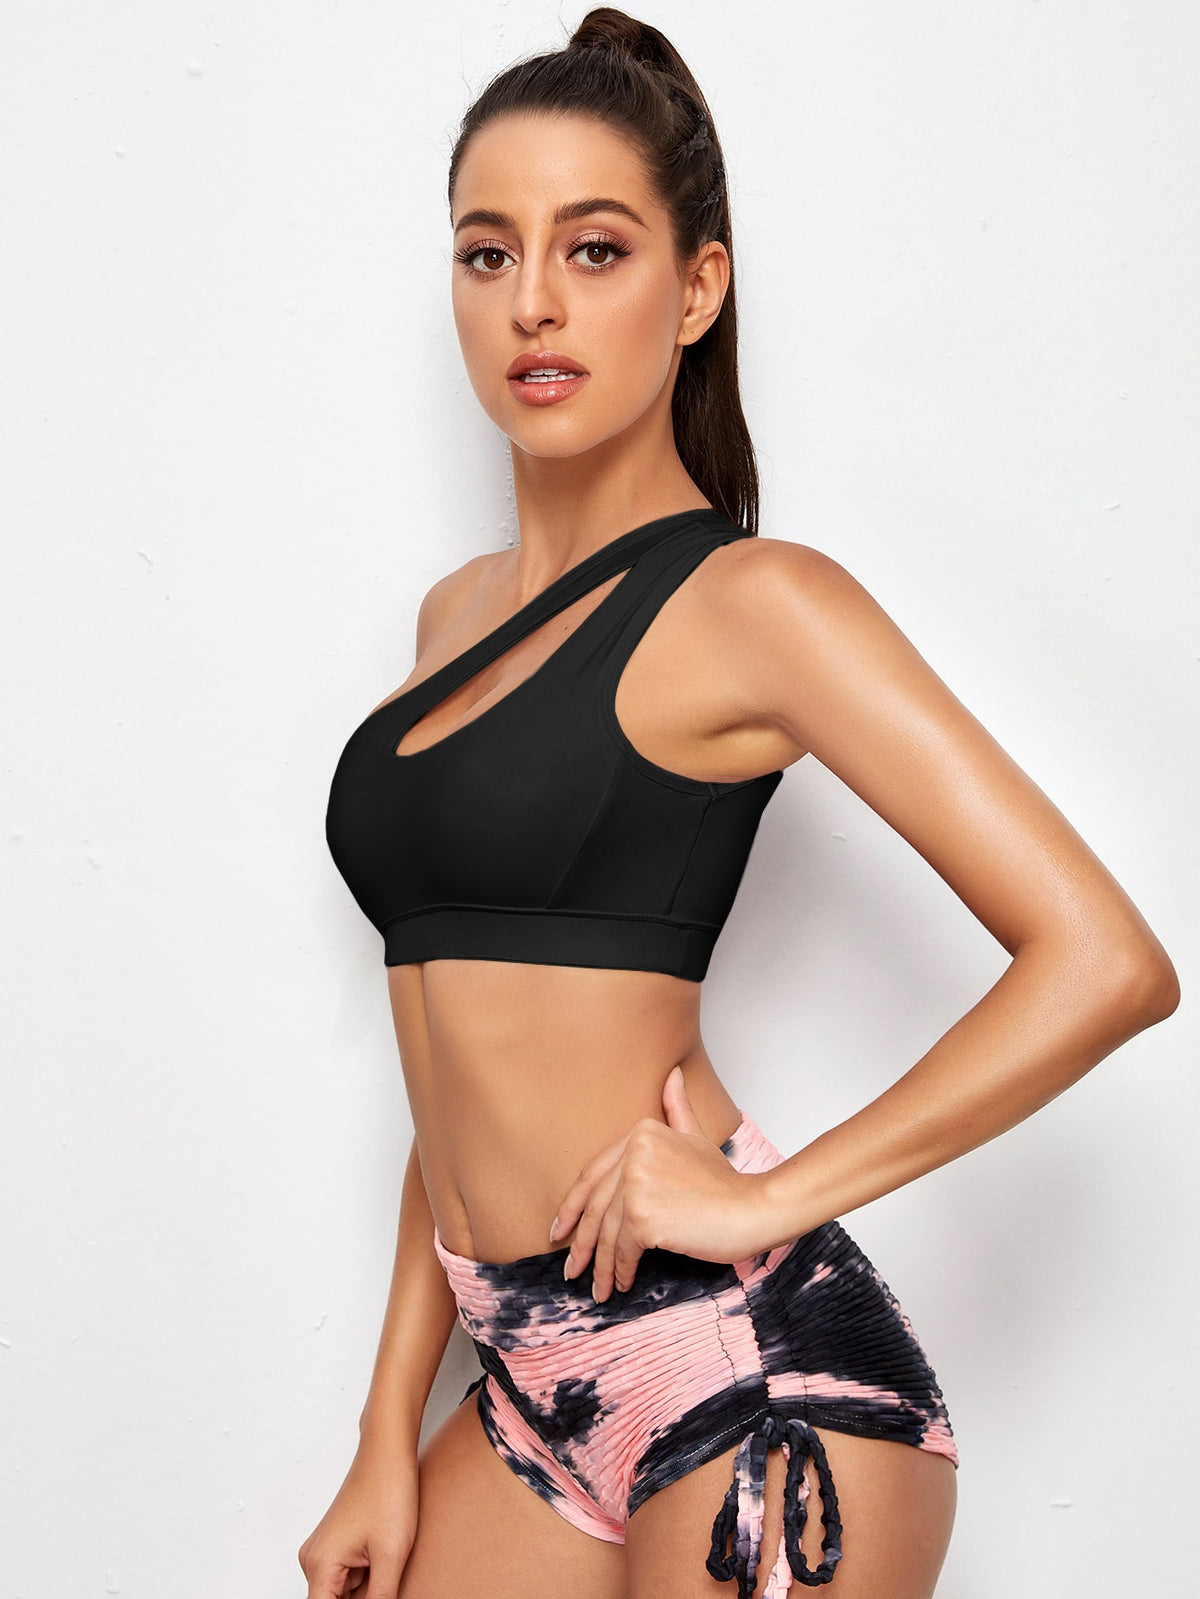 Is That The New Medium Support One Shoulder Sports Bra ??